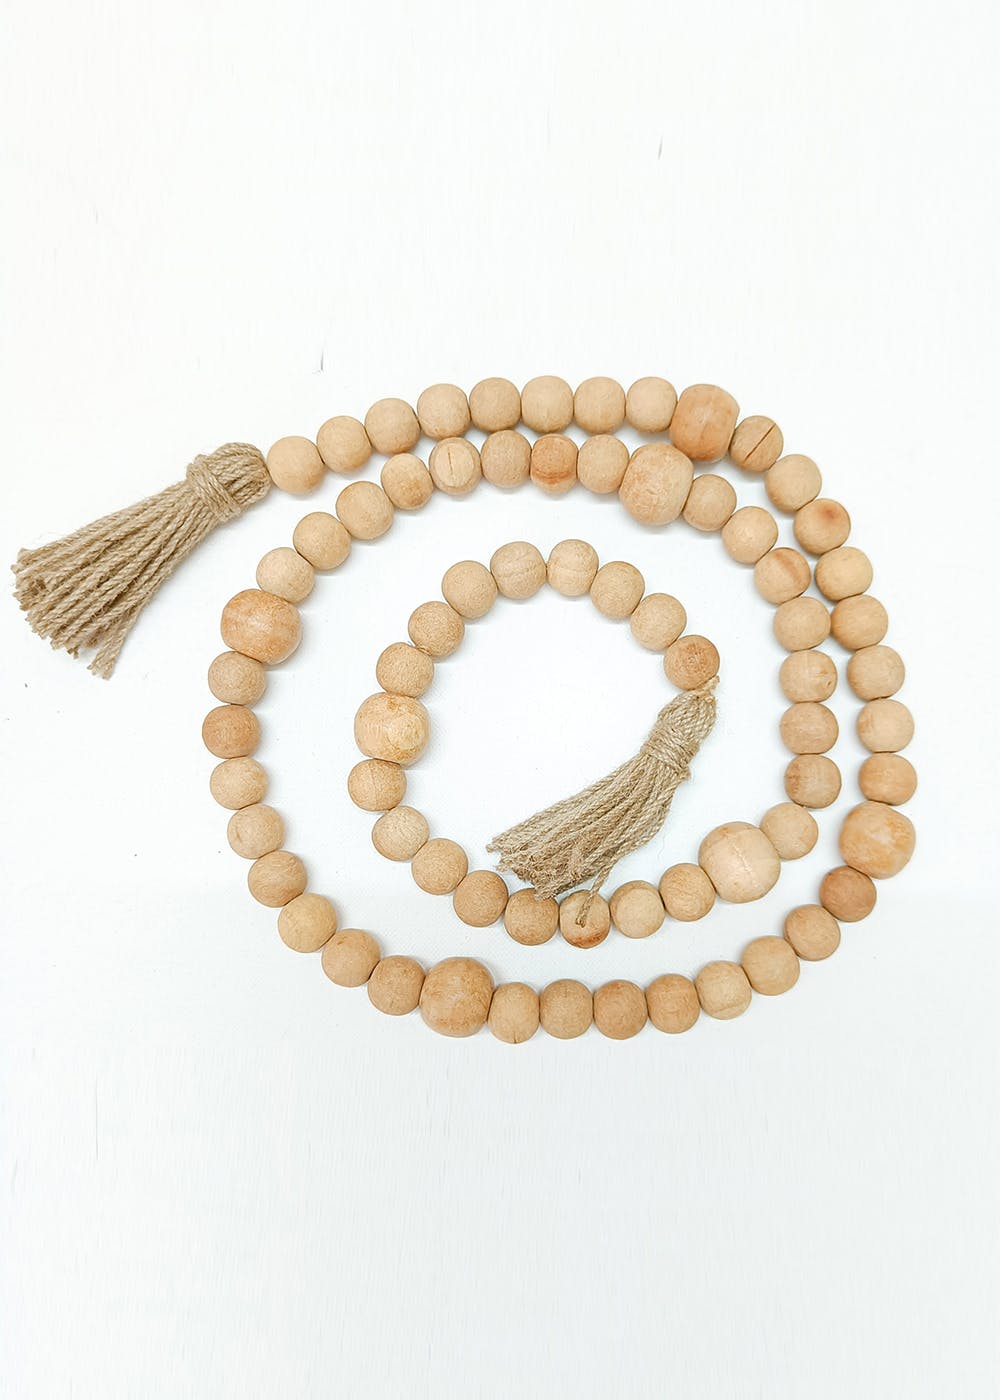 Wood Beads Garland with Jute Tassels Curtain Ties (Length: 60 inches)